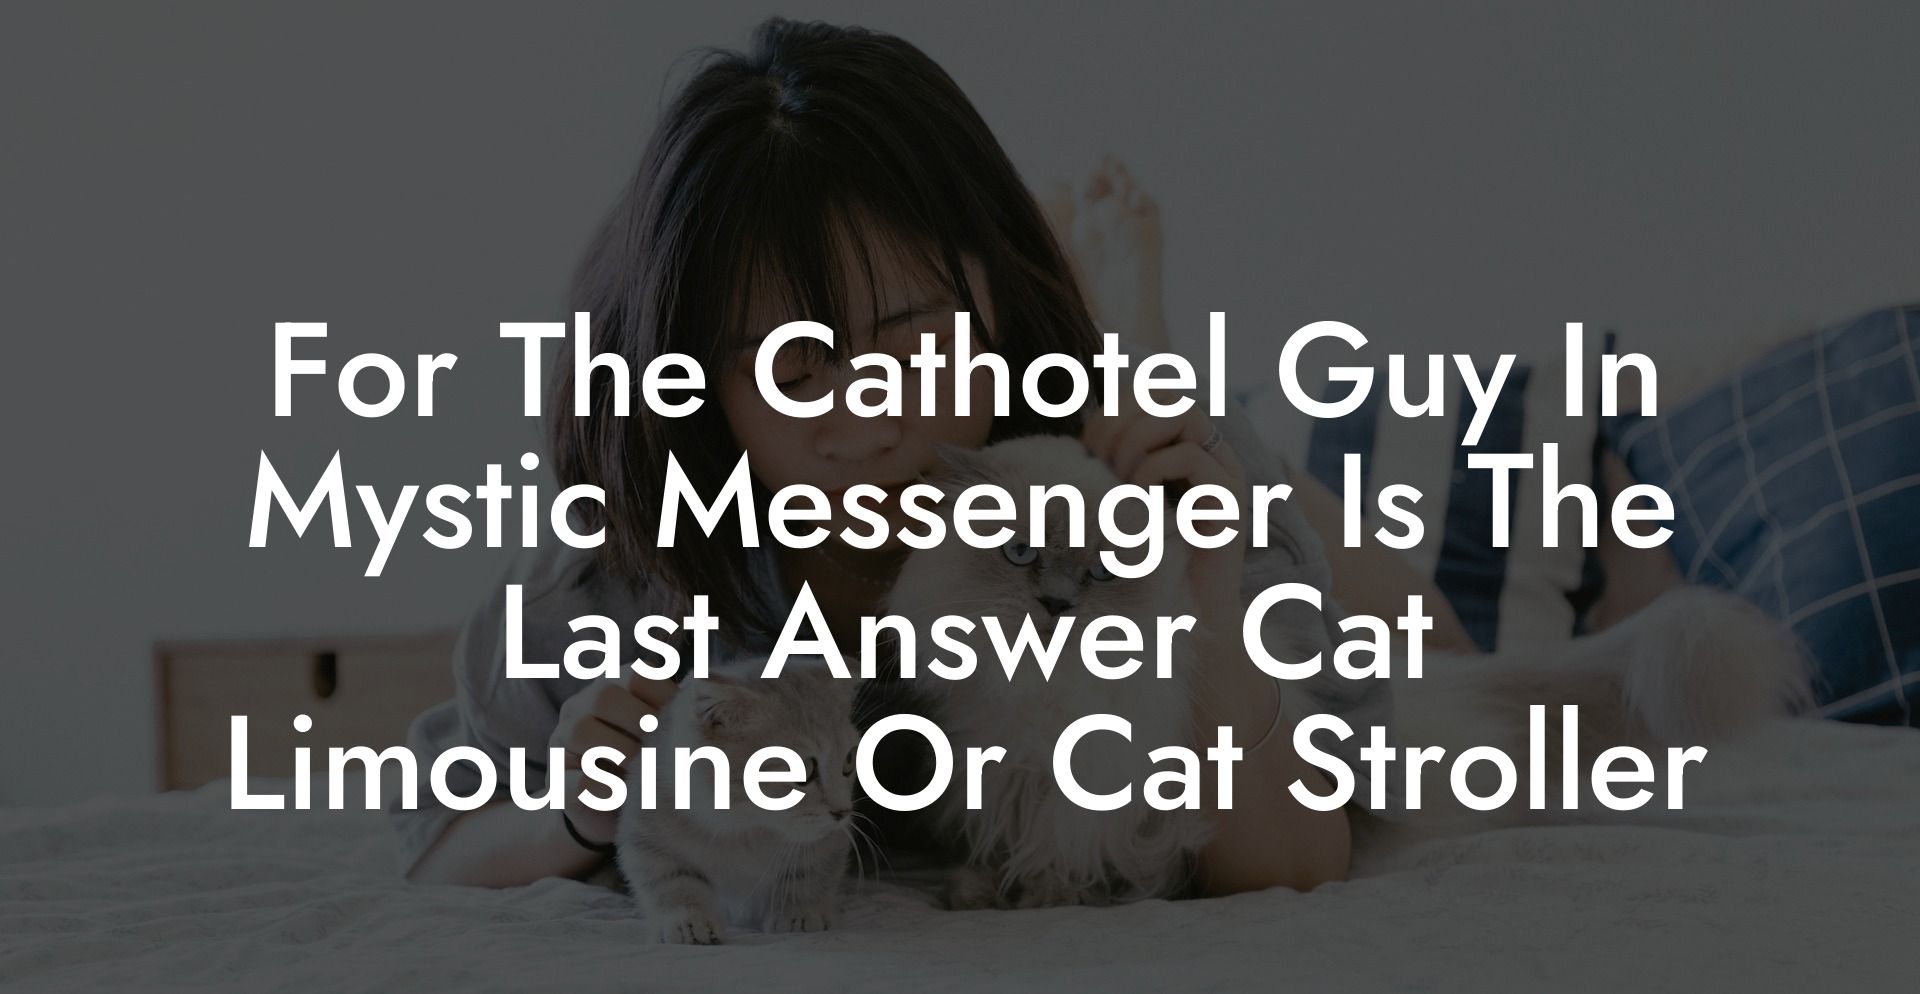 For The Cathotel Guy In Mystic Messenger Is The Last Answer Cat Limousine Or Cat Stroller